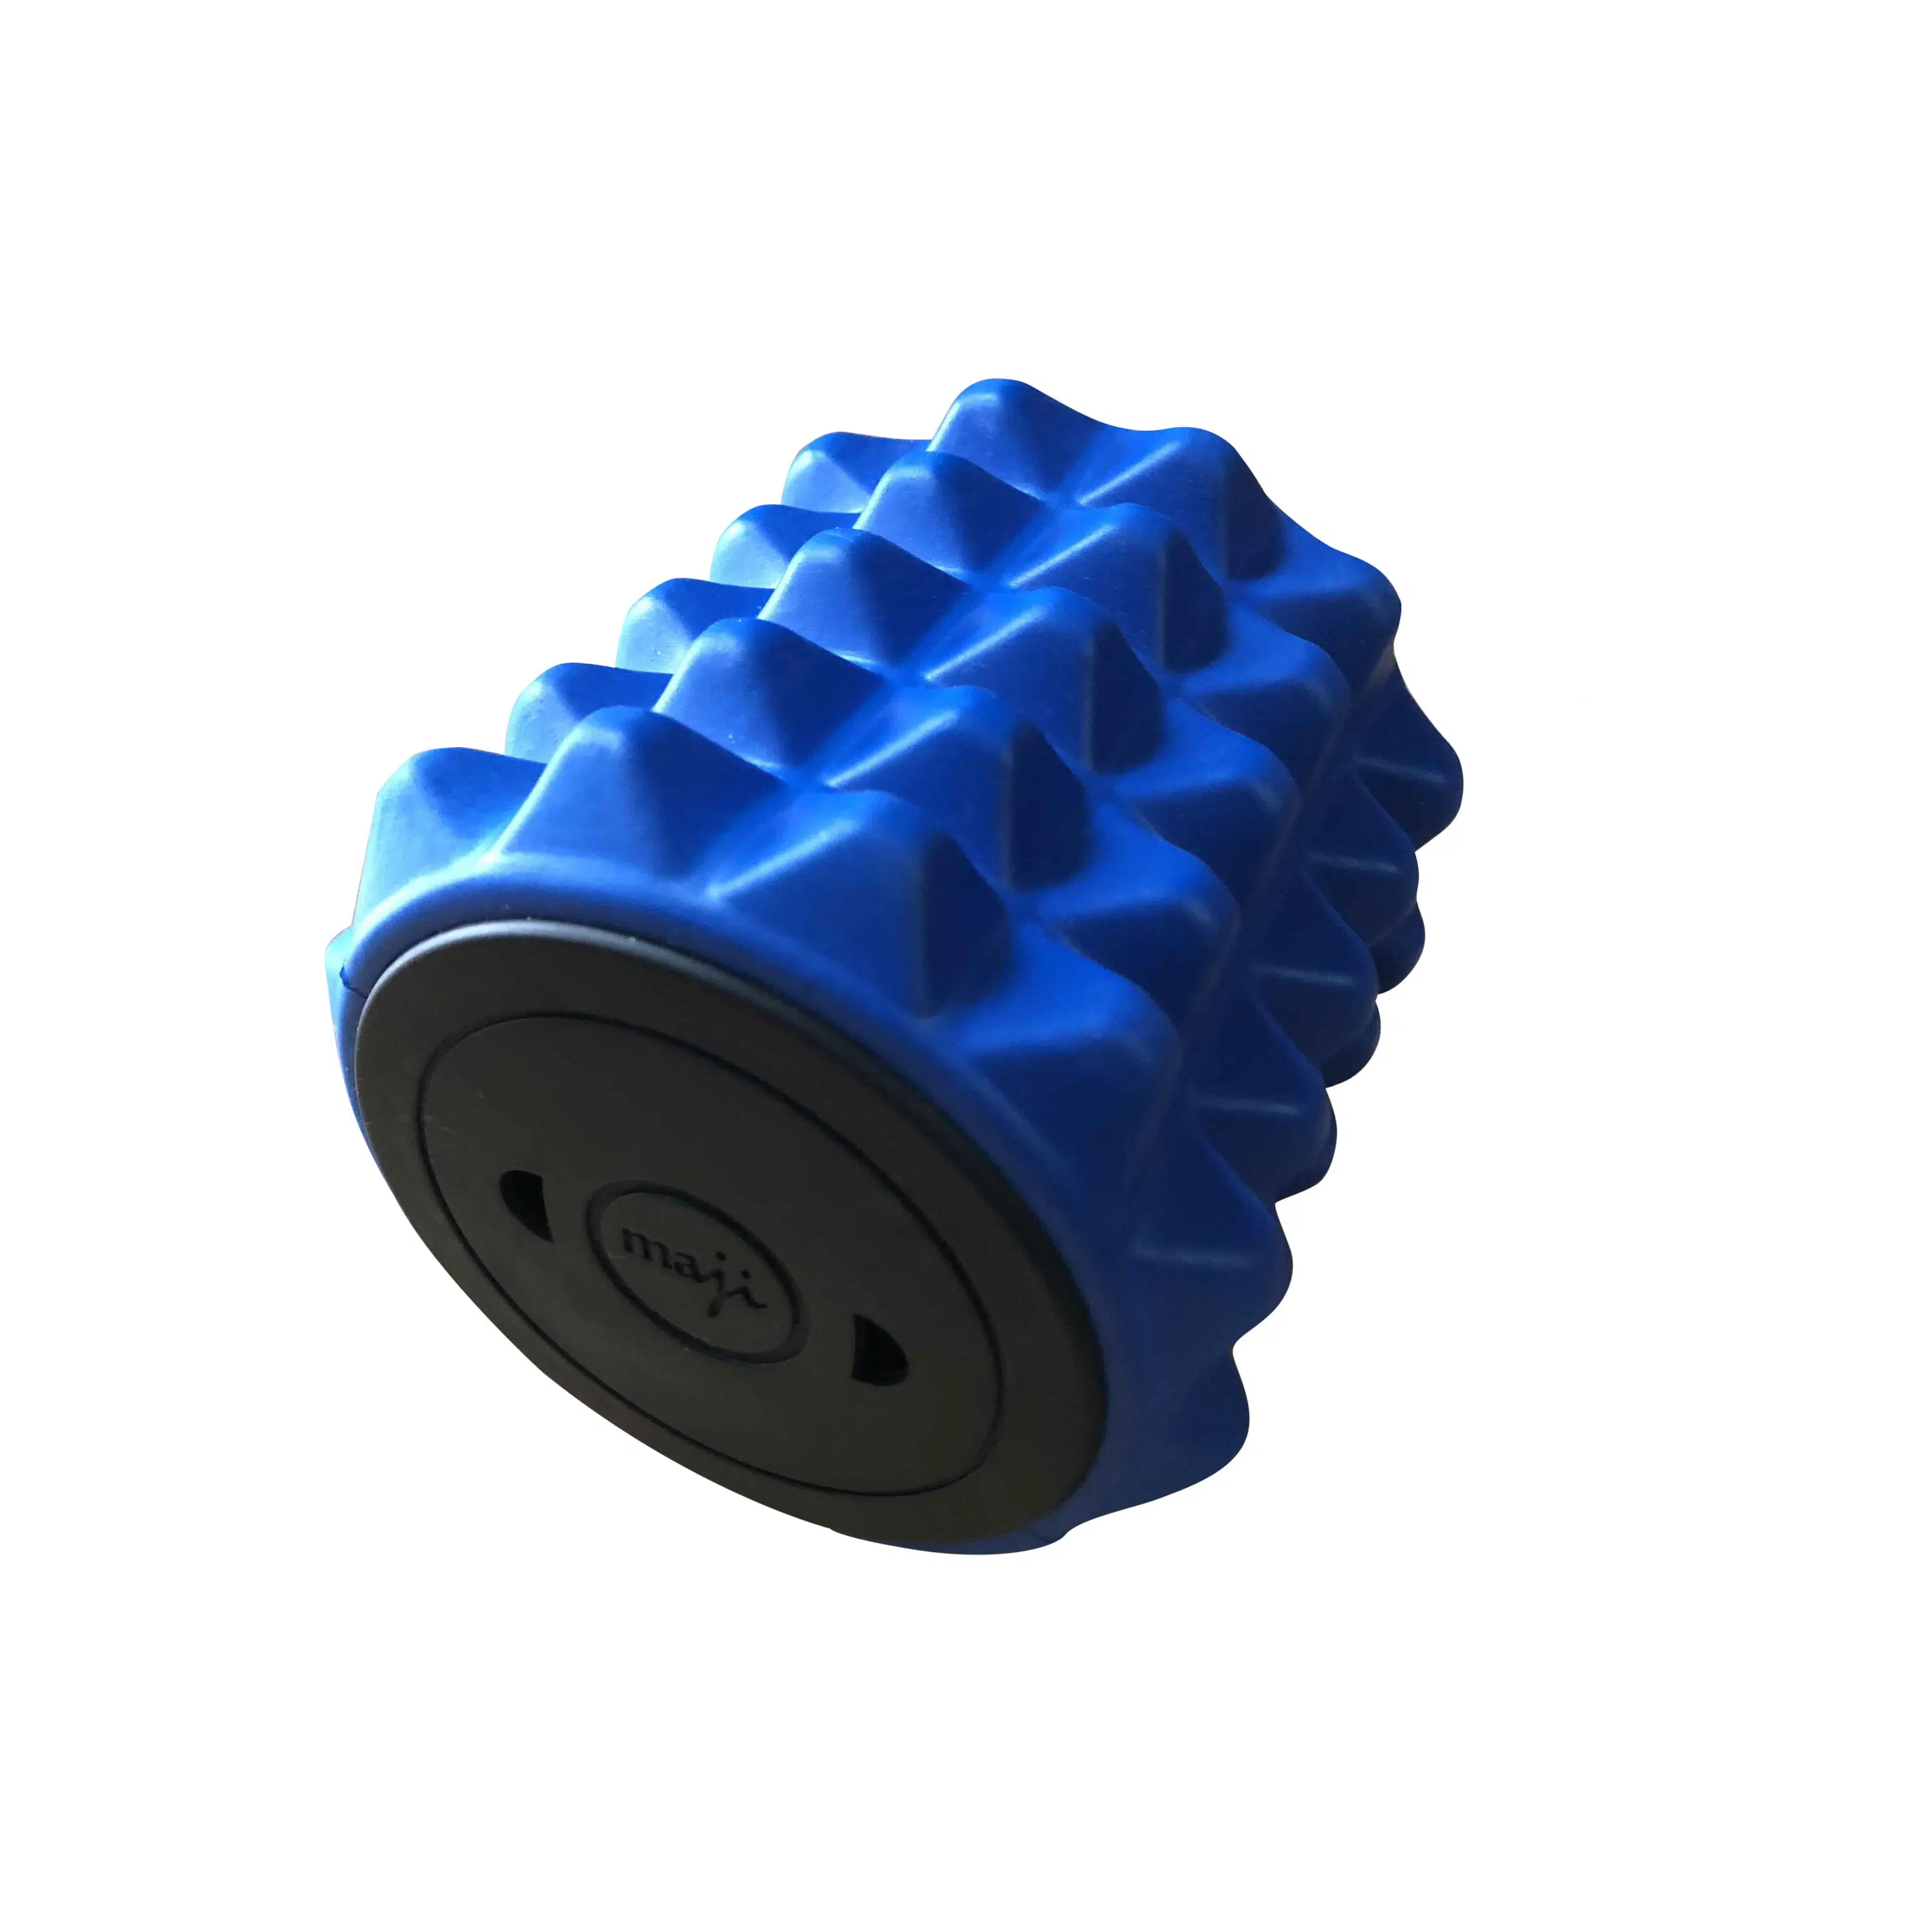 Trigger Point Therapy Physical Therapy Mobility Tool